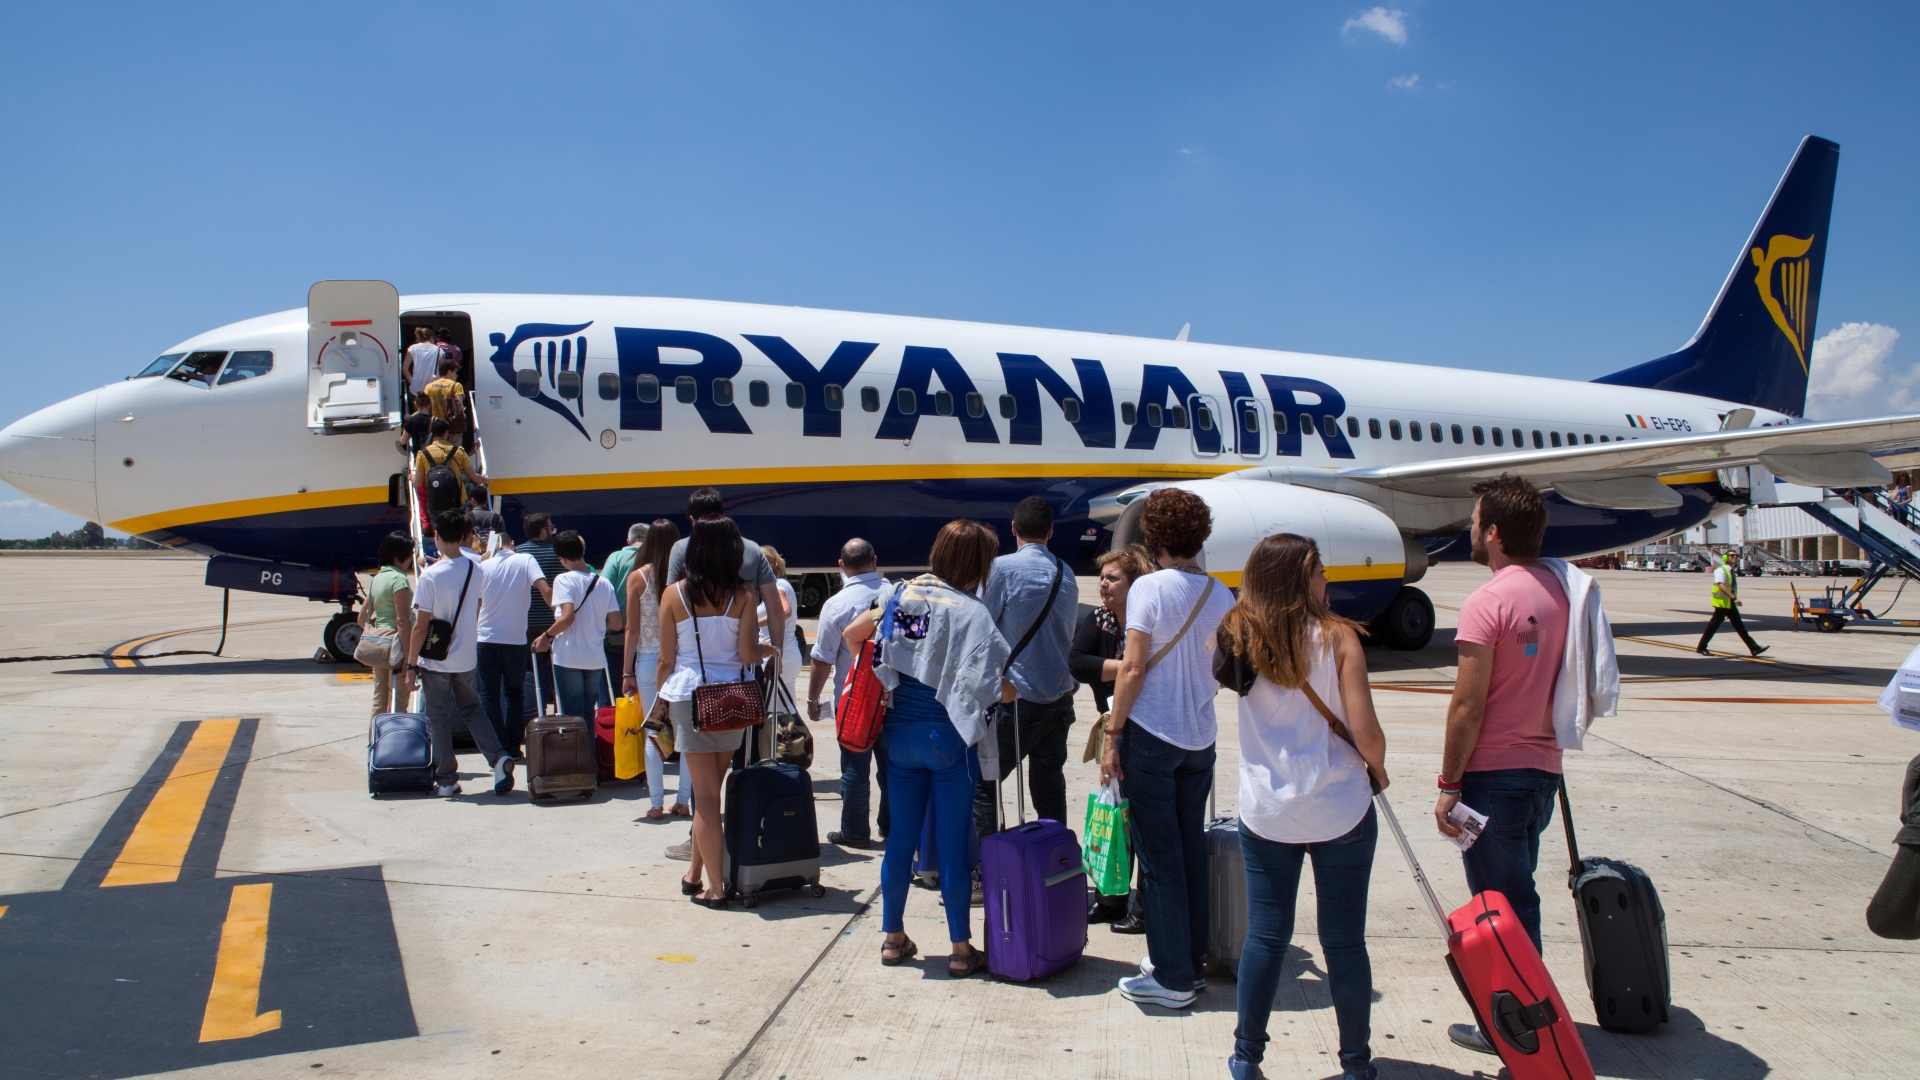 Ryanair adds more seats than 1 MILLION to its flights this winter as British Airways cancels thousands